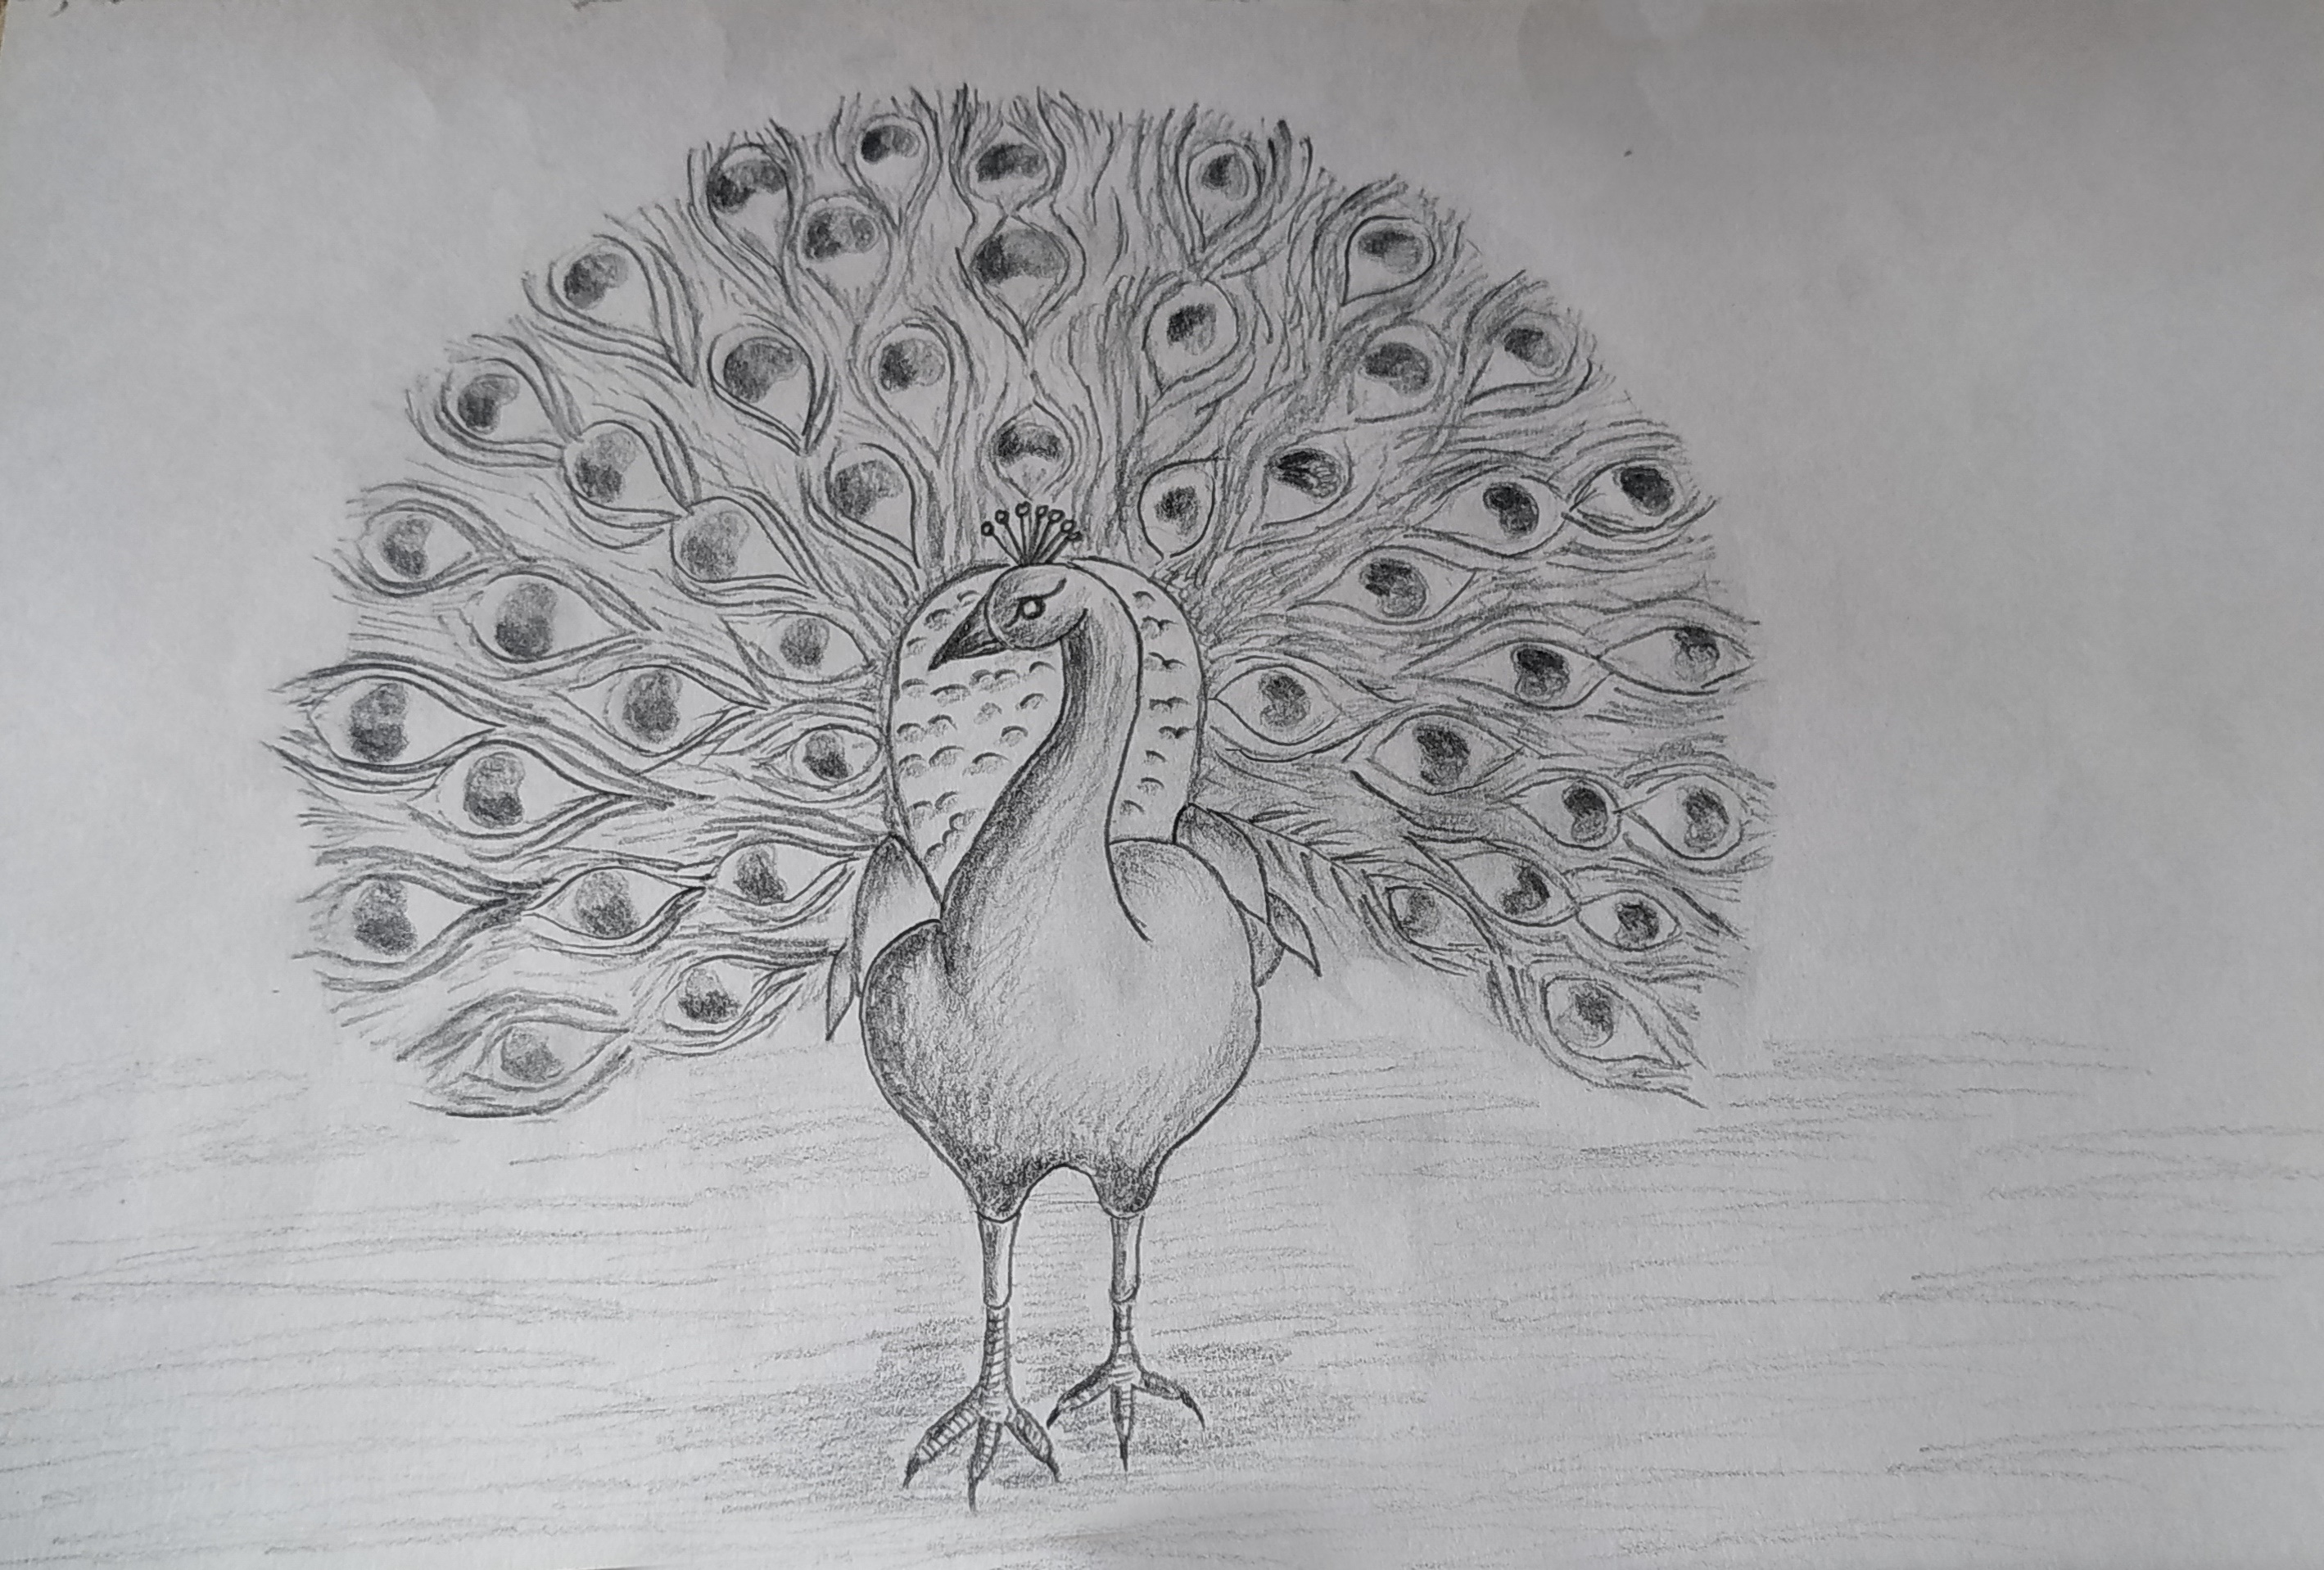 How to draw a Peacock  in easy steps  Pencil Art  Pencil Sketch  step  by step  YouTube